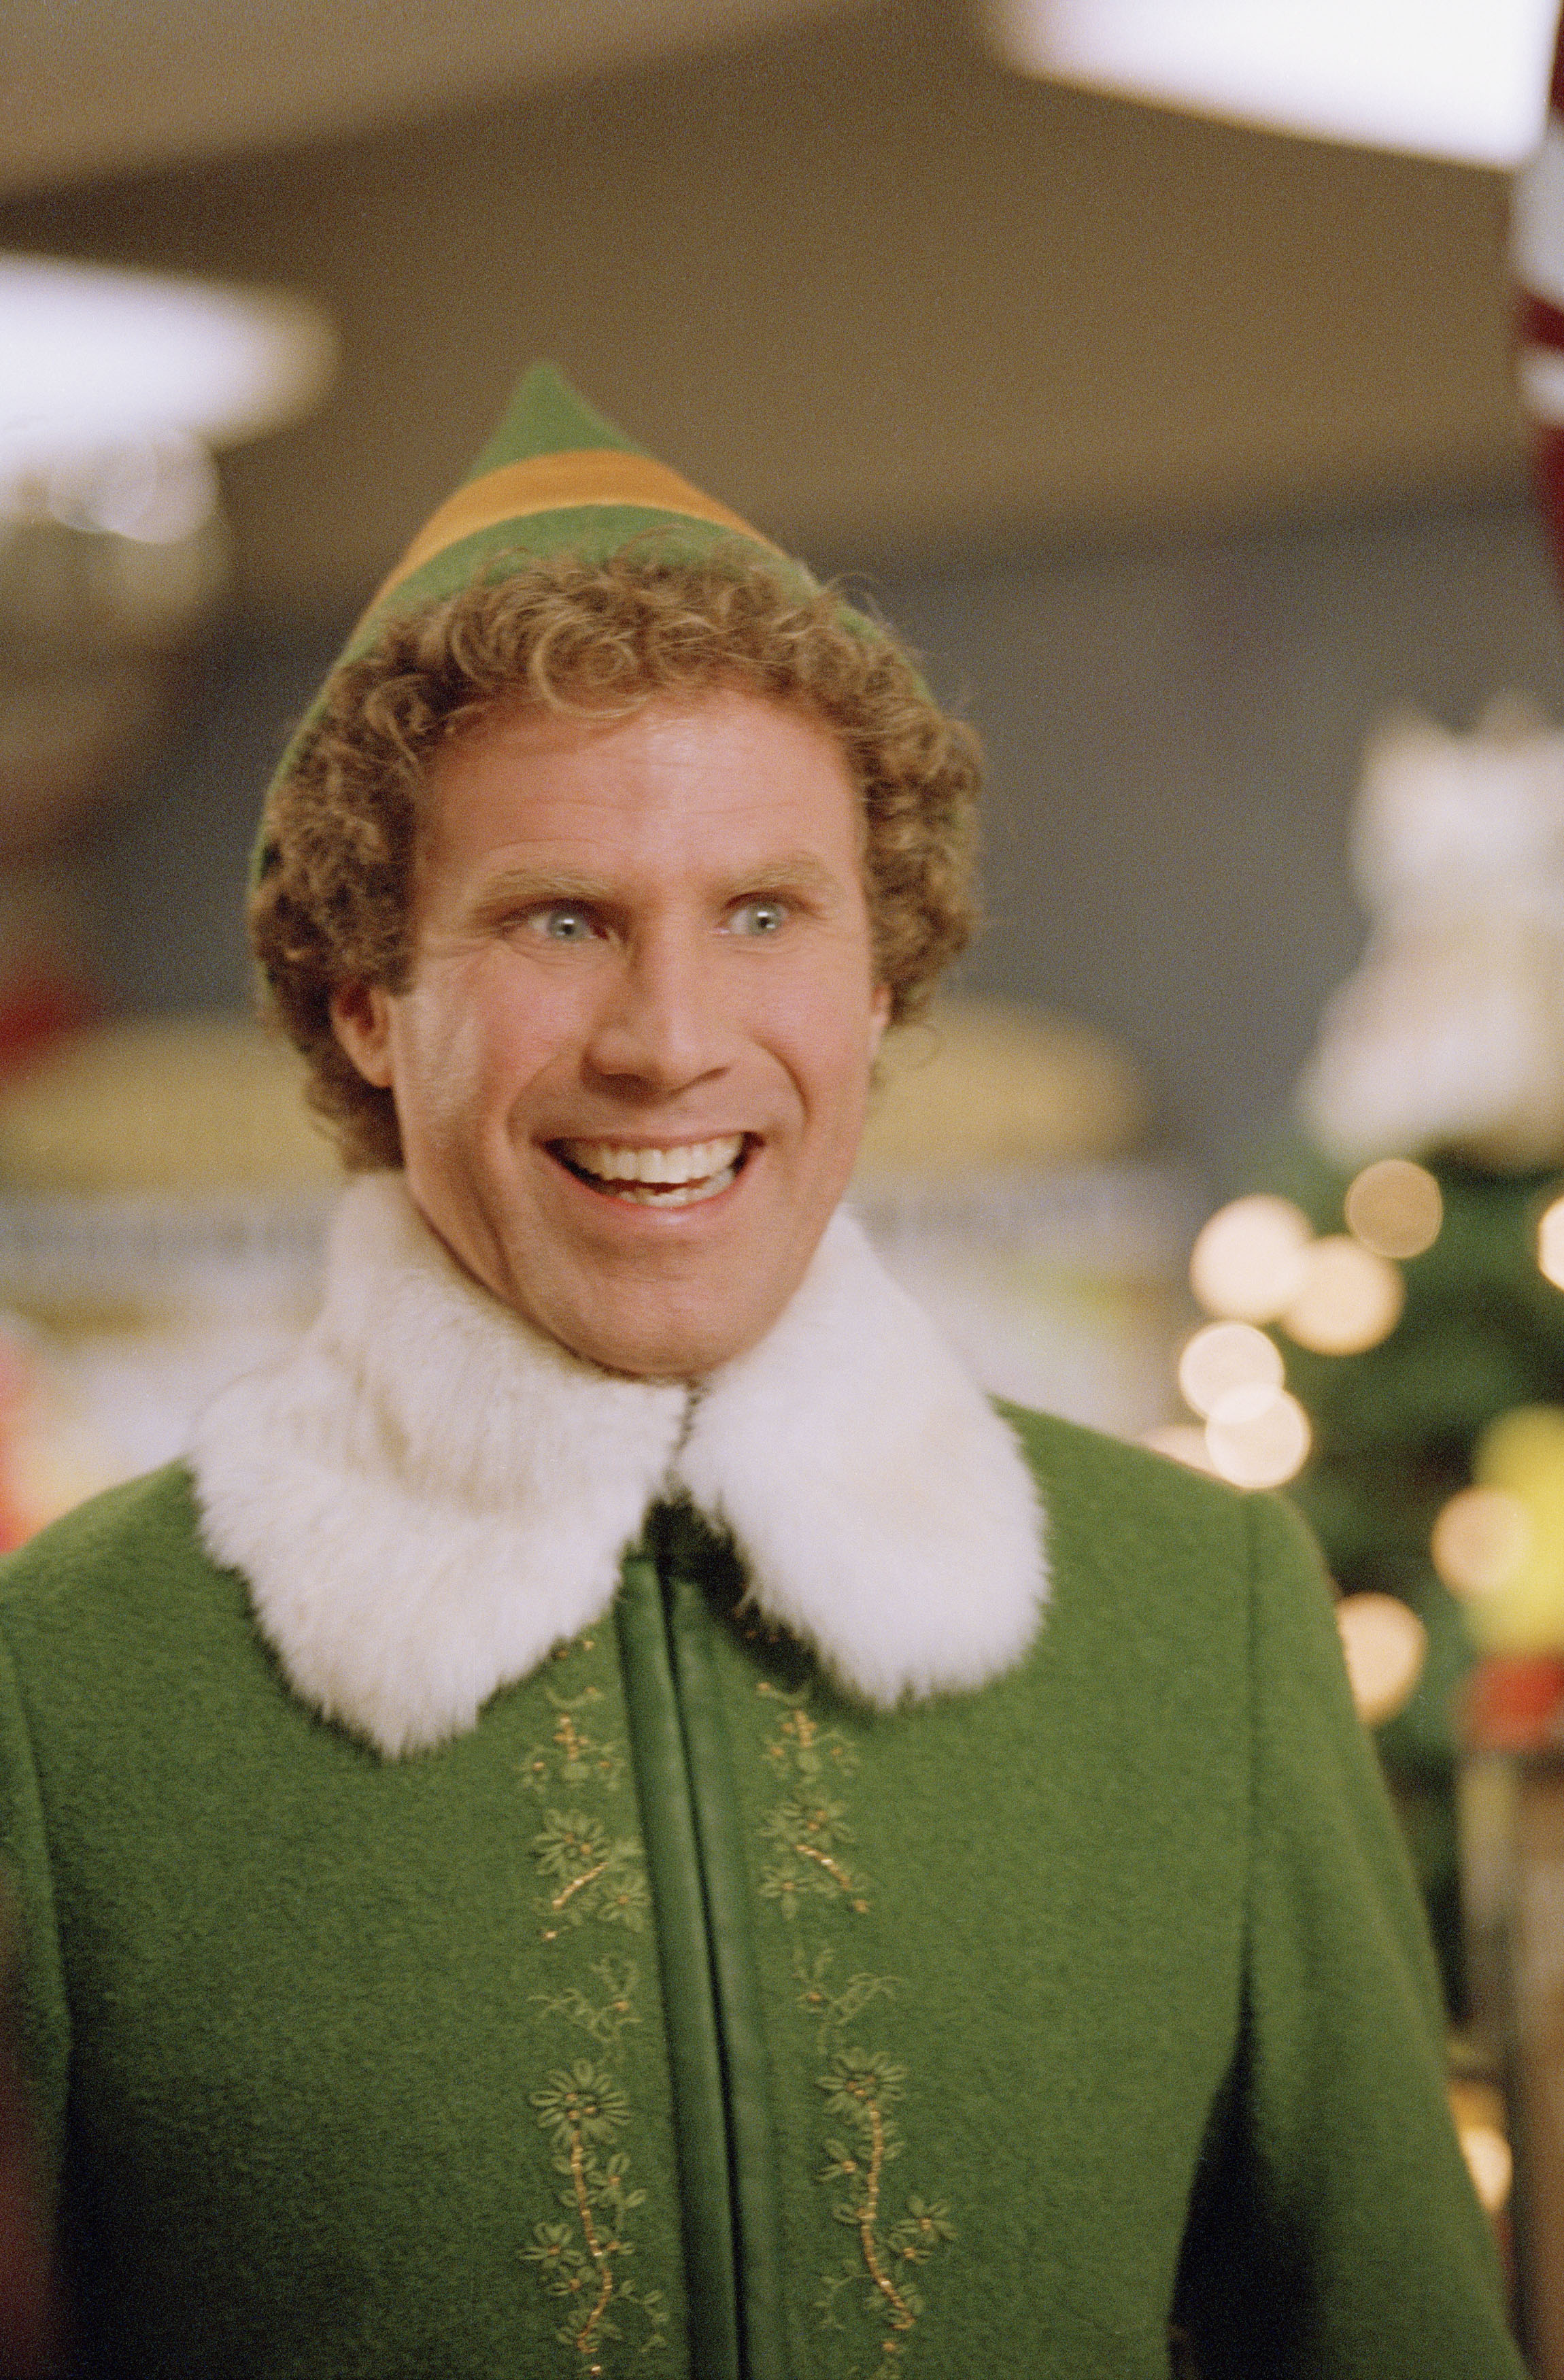 <p>And now for our No. 1 pick... Will Ferrell as Buddy Hobbs in "Elf"! We absolutely <i>loved</i> everything about "Elf," from the fun songs to the creative costumes to the hilarious "real world" scenes to the spaghetti with chocolate syrup. It's the perfect Christmas movie and that's all thanks to Will's comedic acting as he brings lovable Buddy to life.</p>